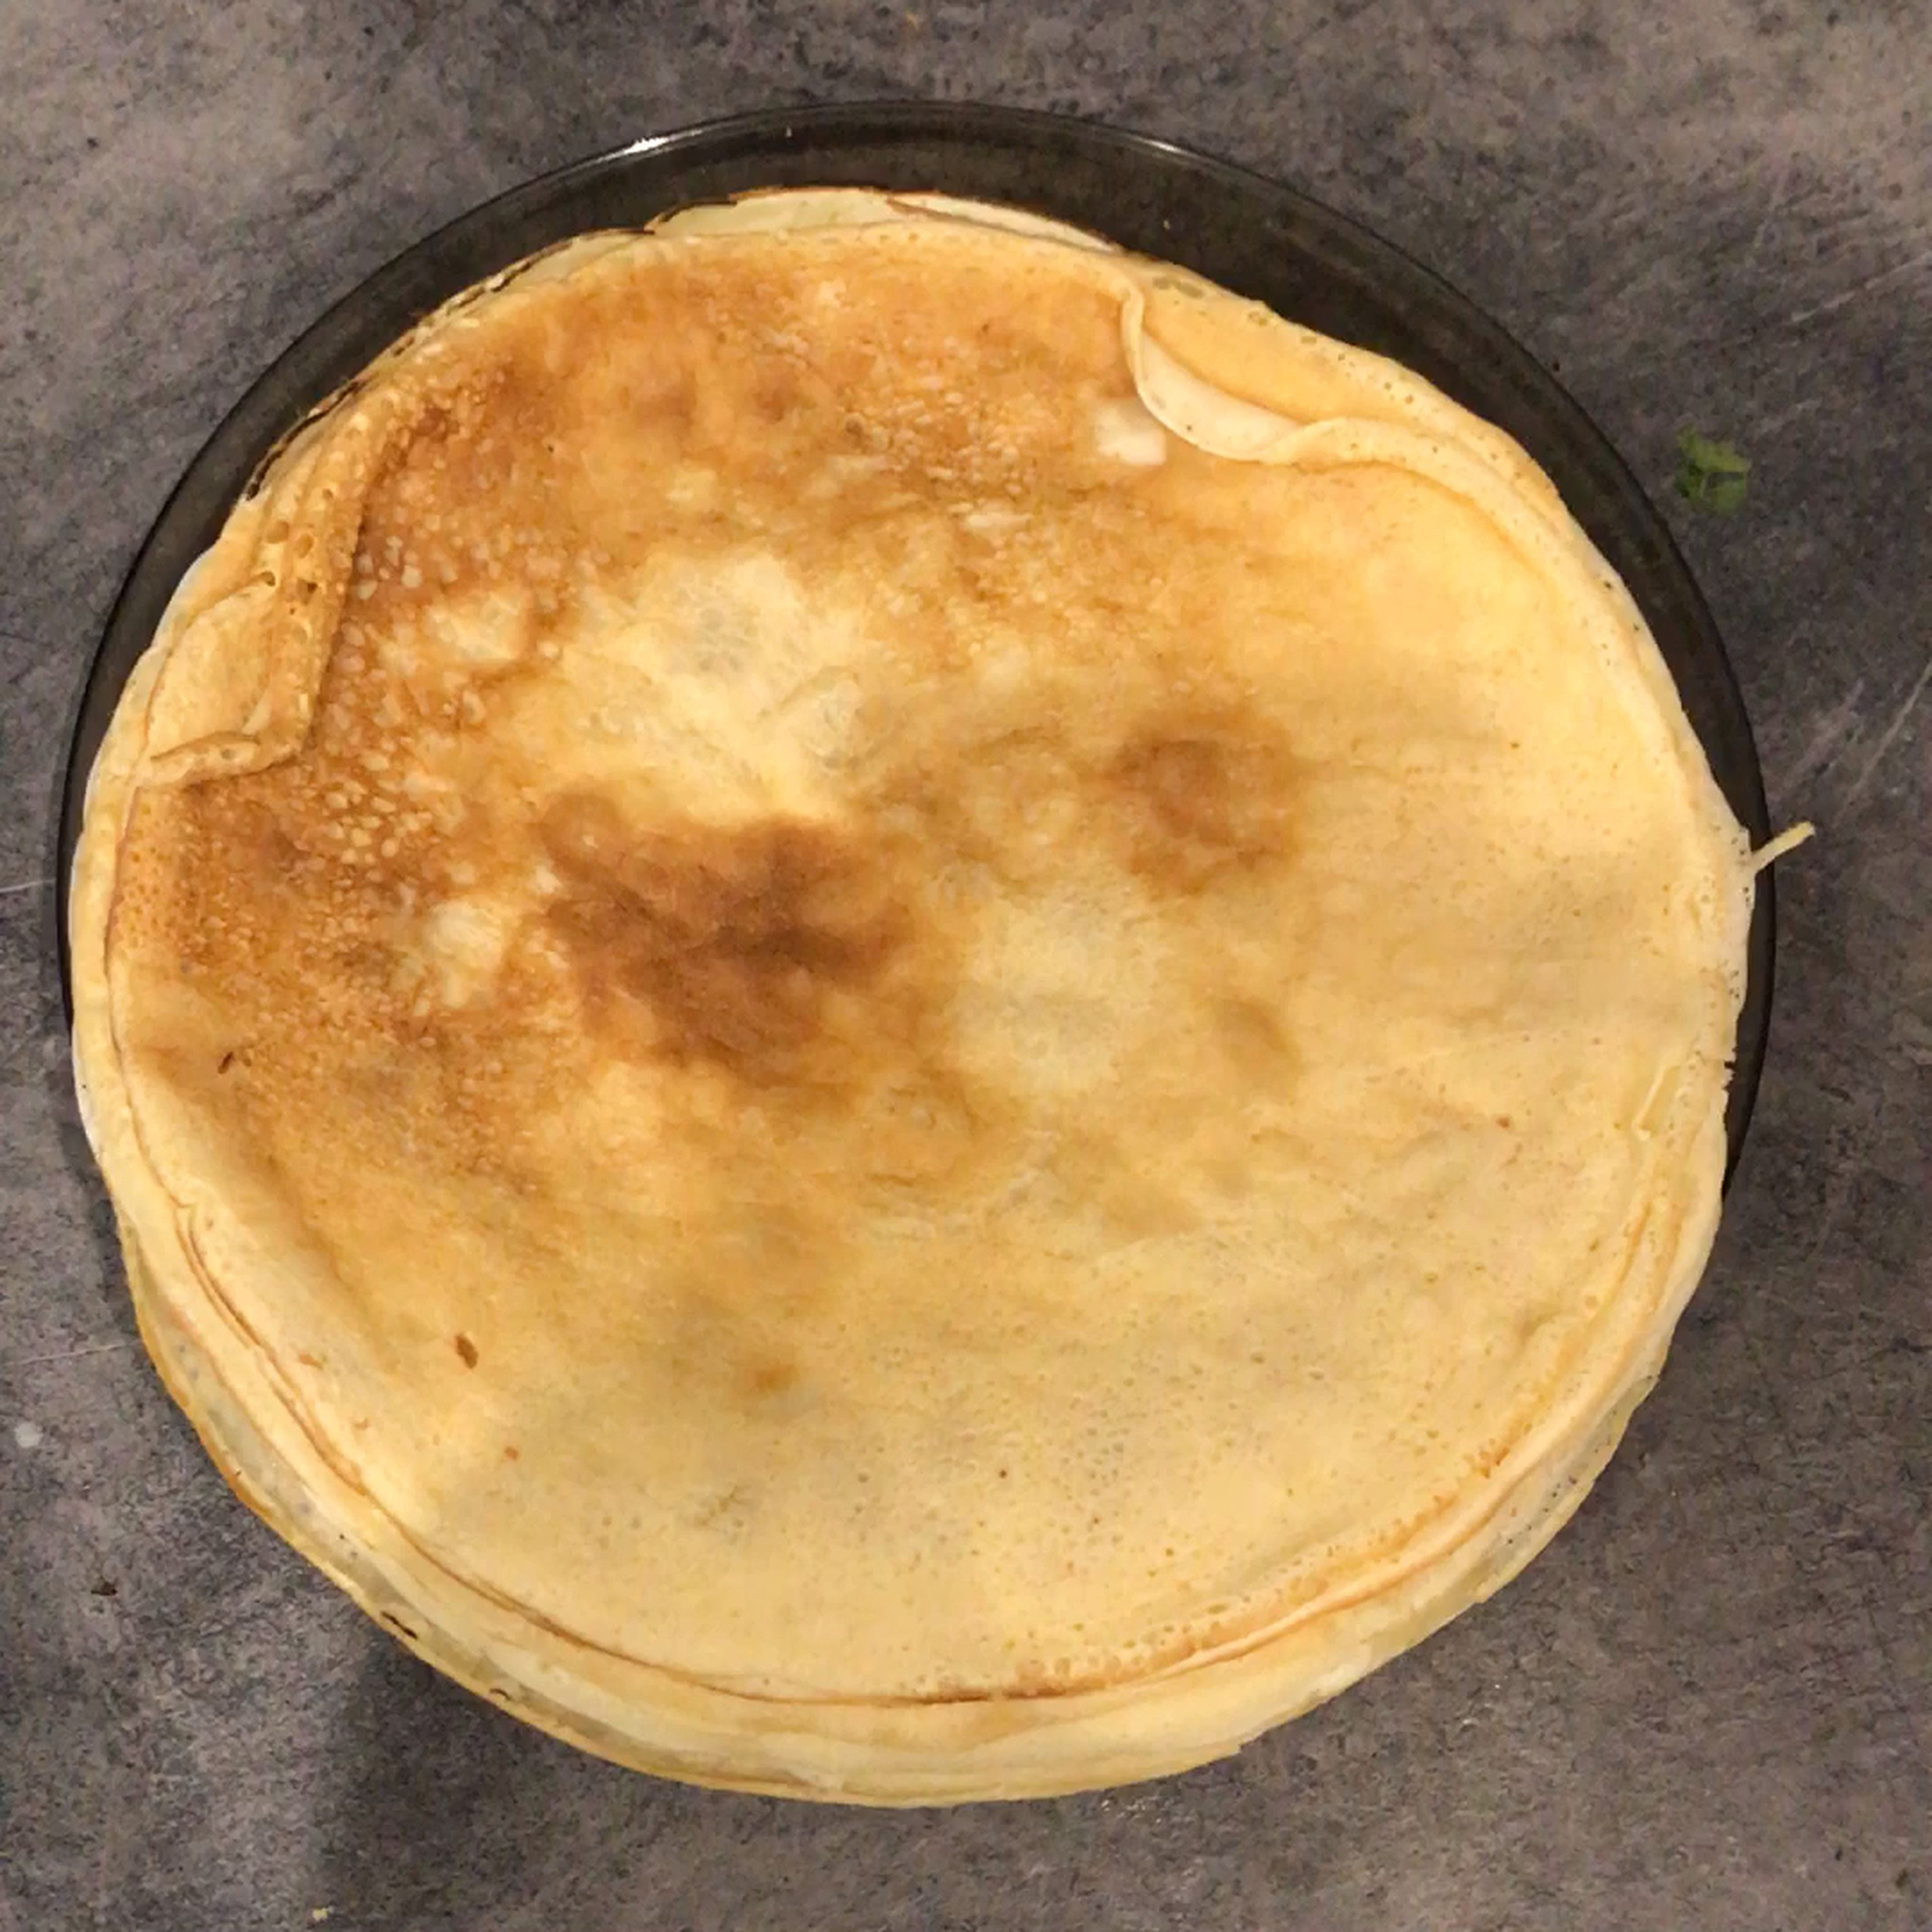 When pancake will be gold take it out to a plate. After 5 minutes it will be fluffy and soft